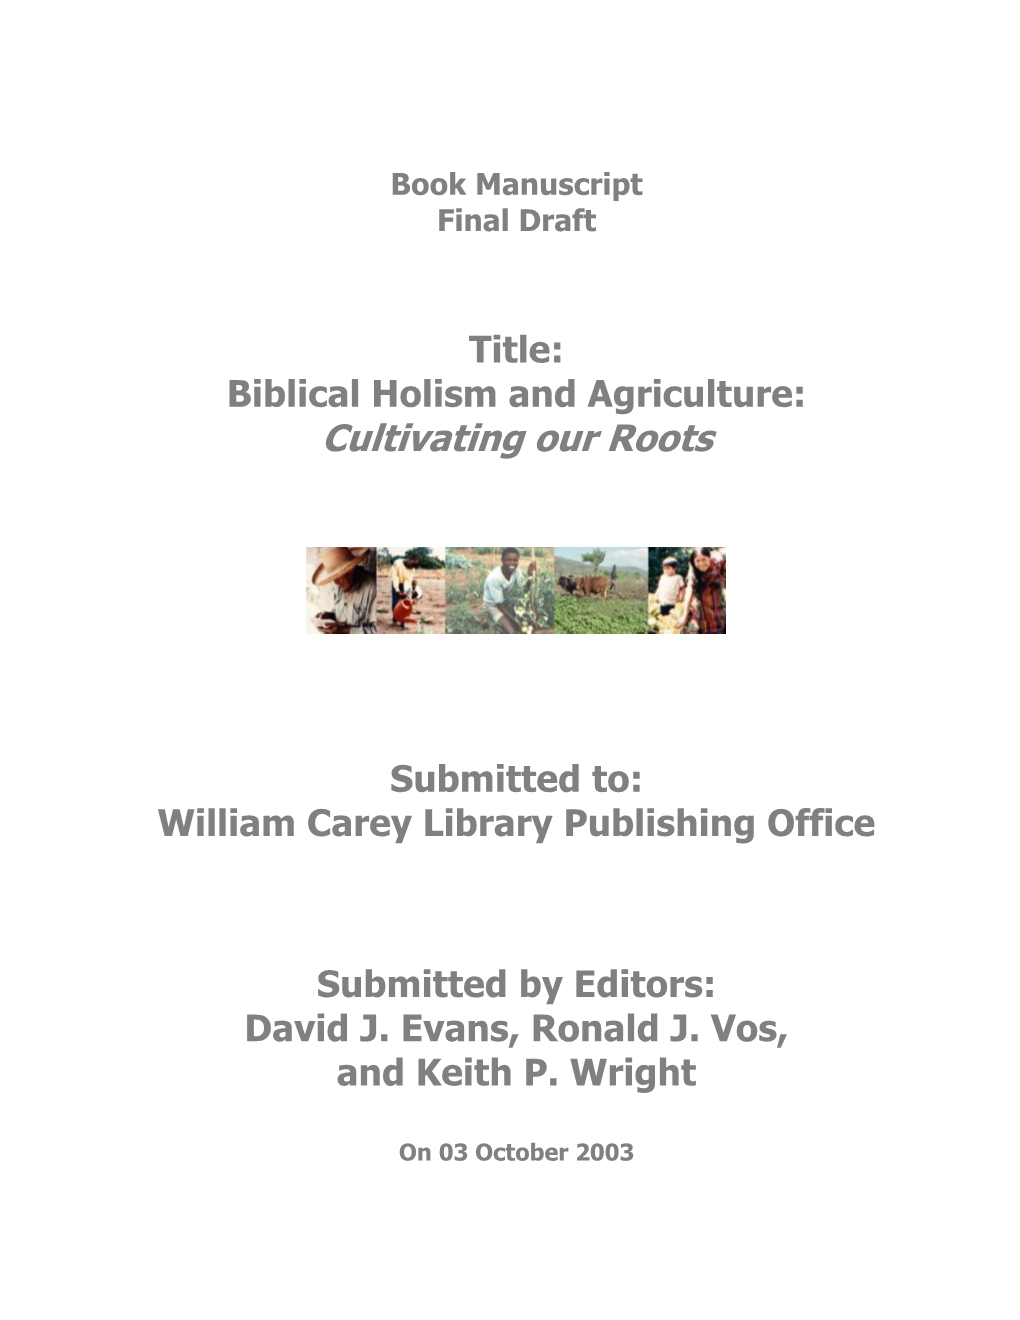 Biblical Holism and Agriculture: Cultivating Our Roots